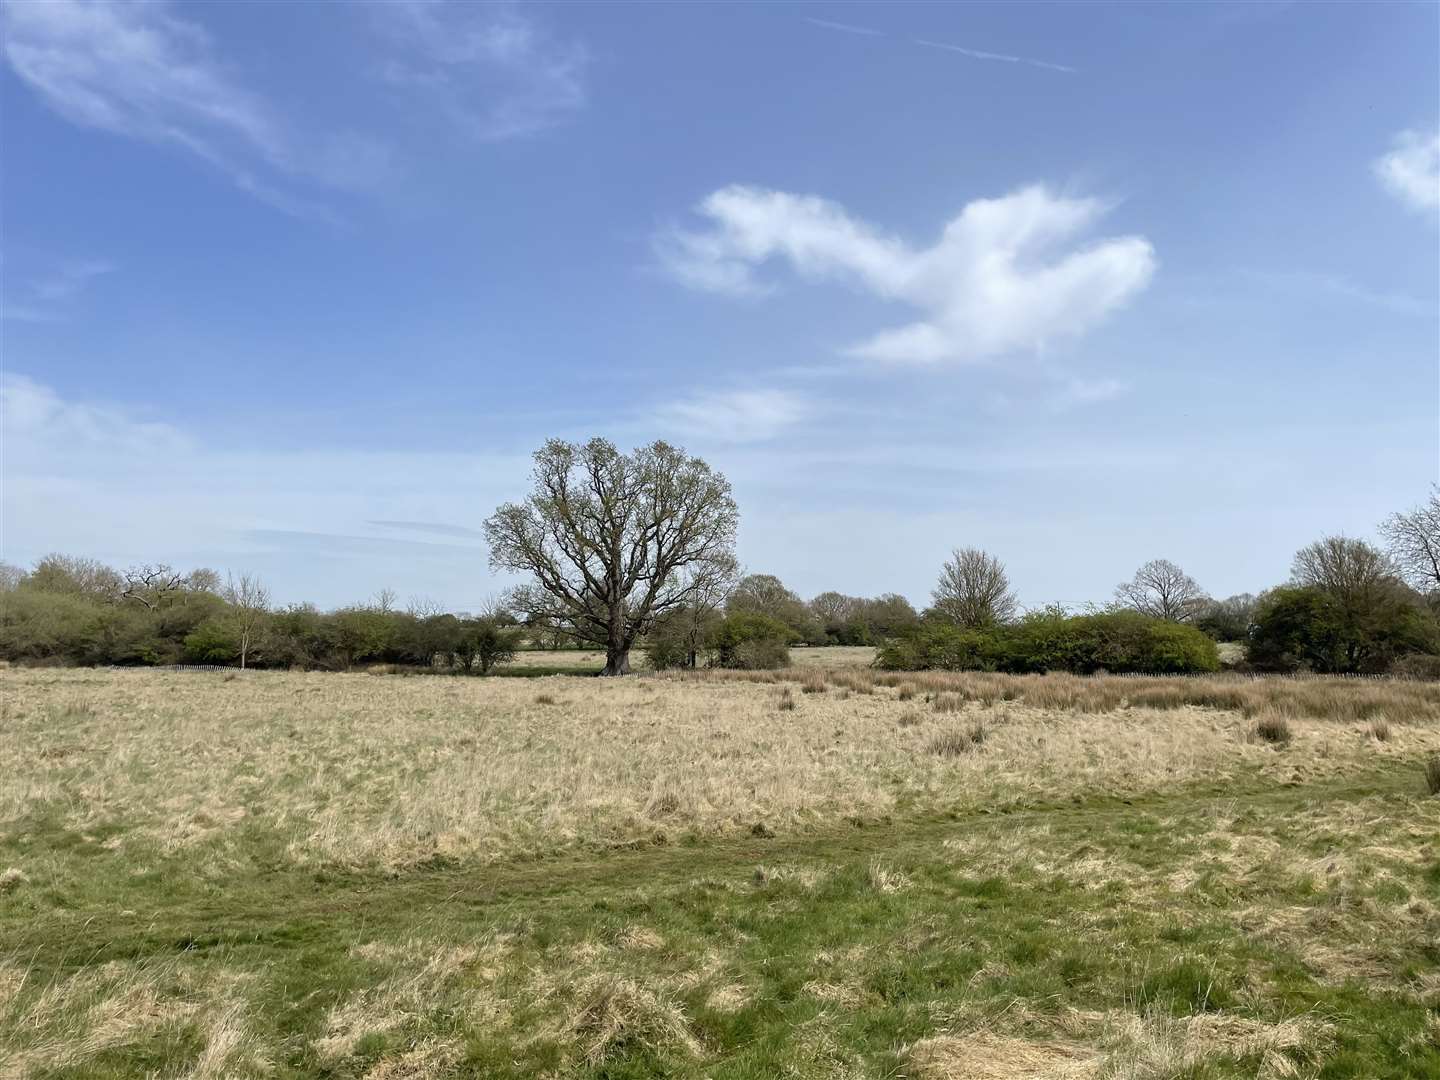 Developers want to build 141 homes on Limes Land in Tenterden